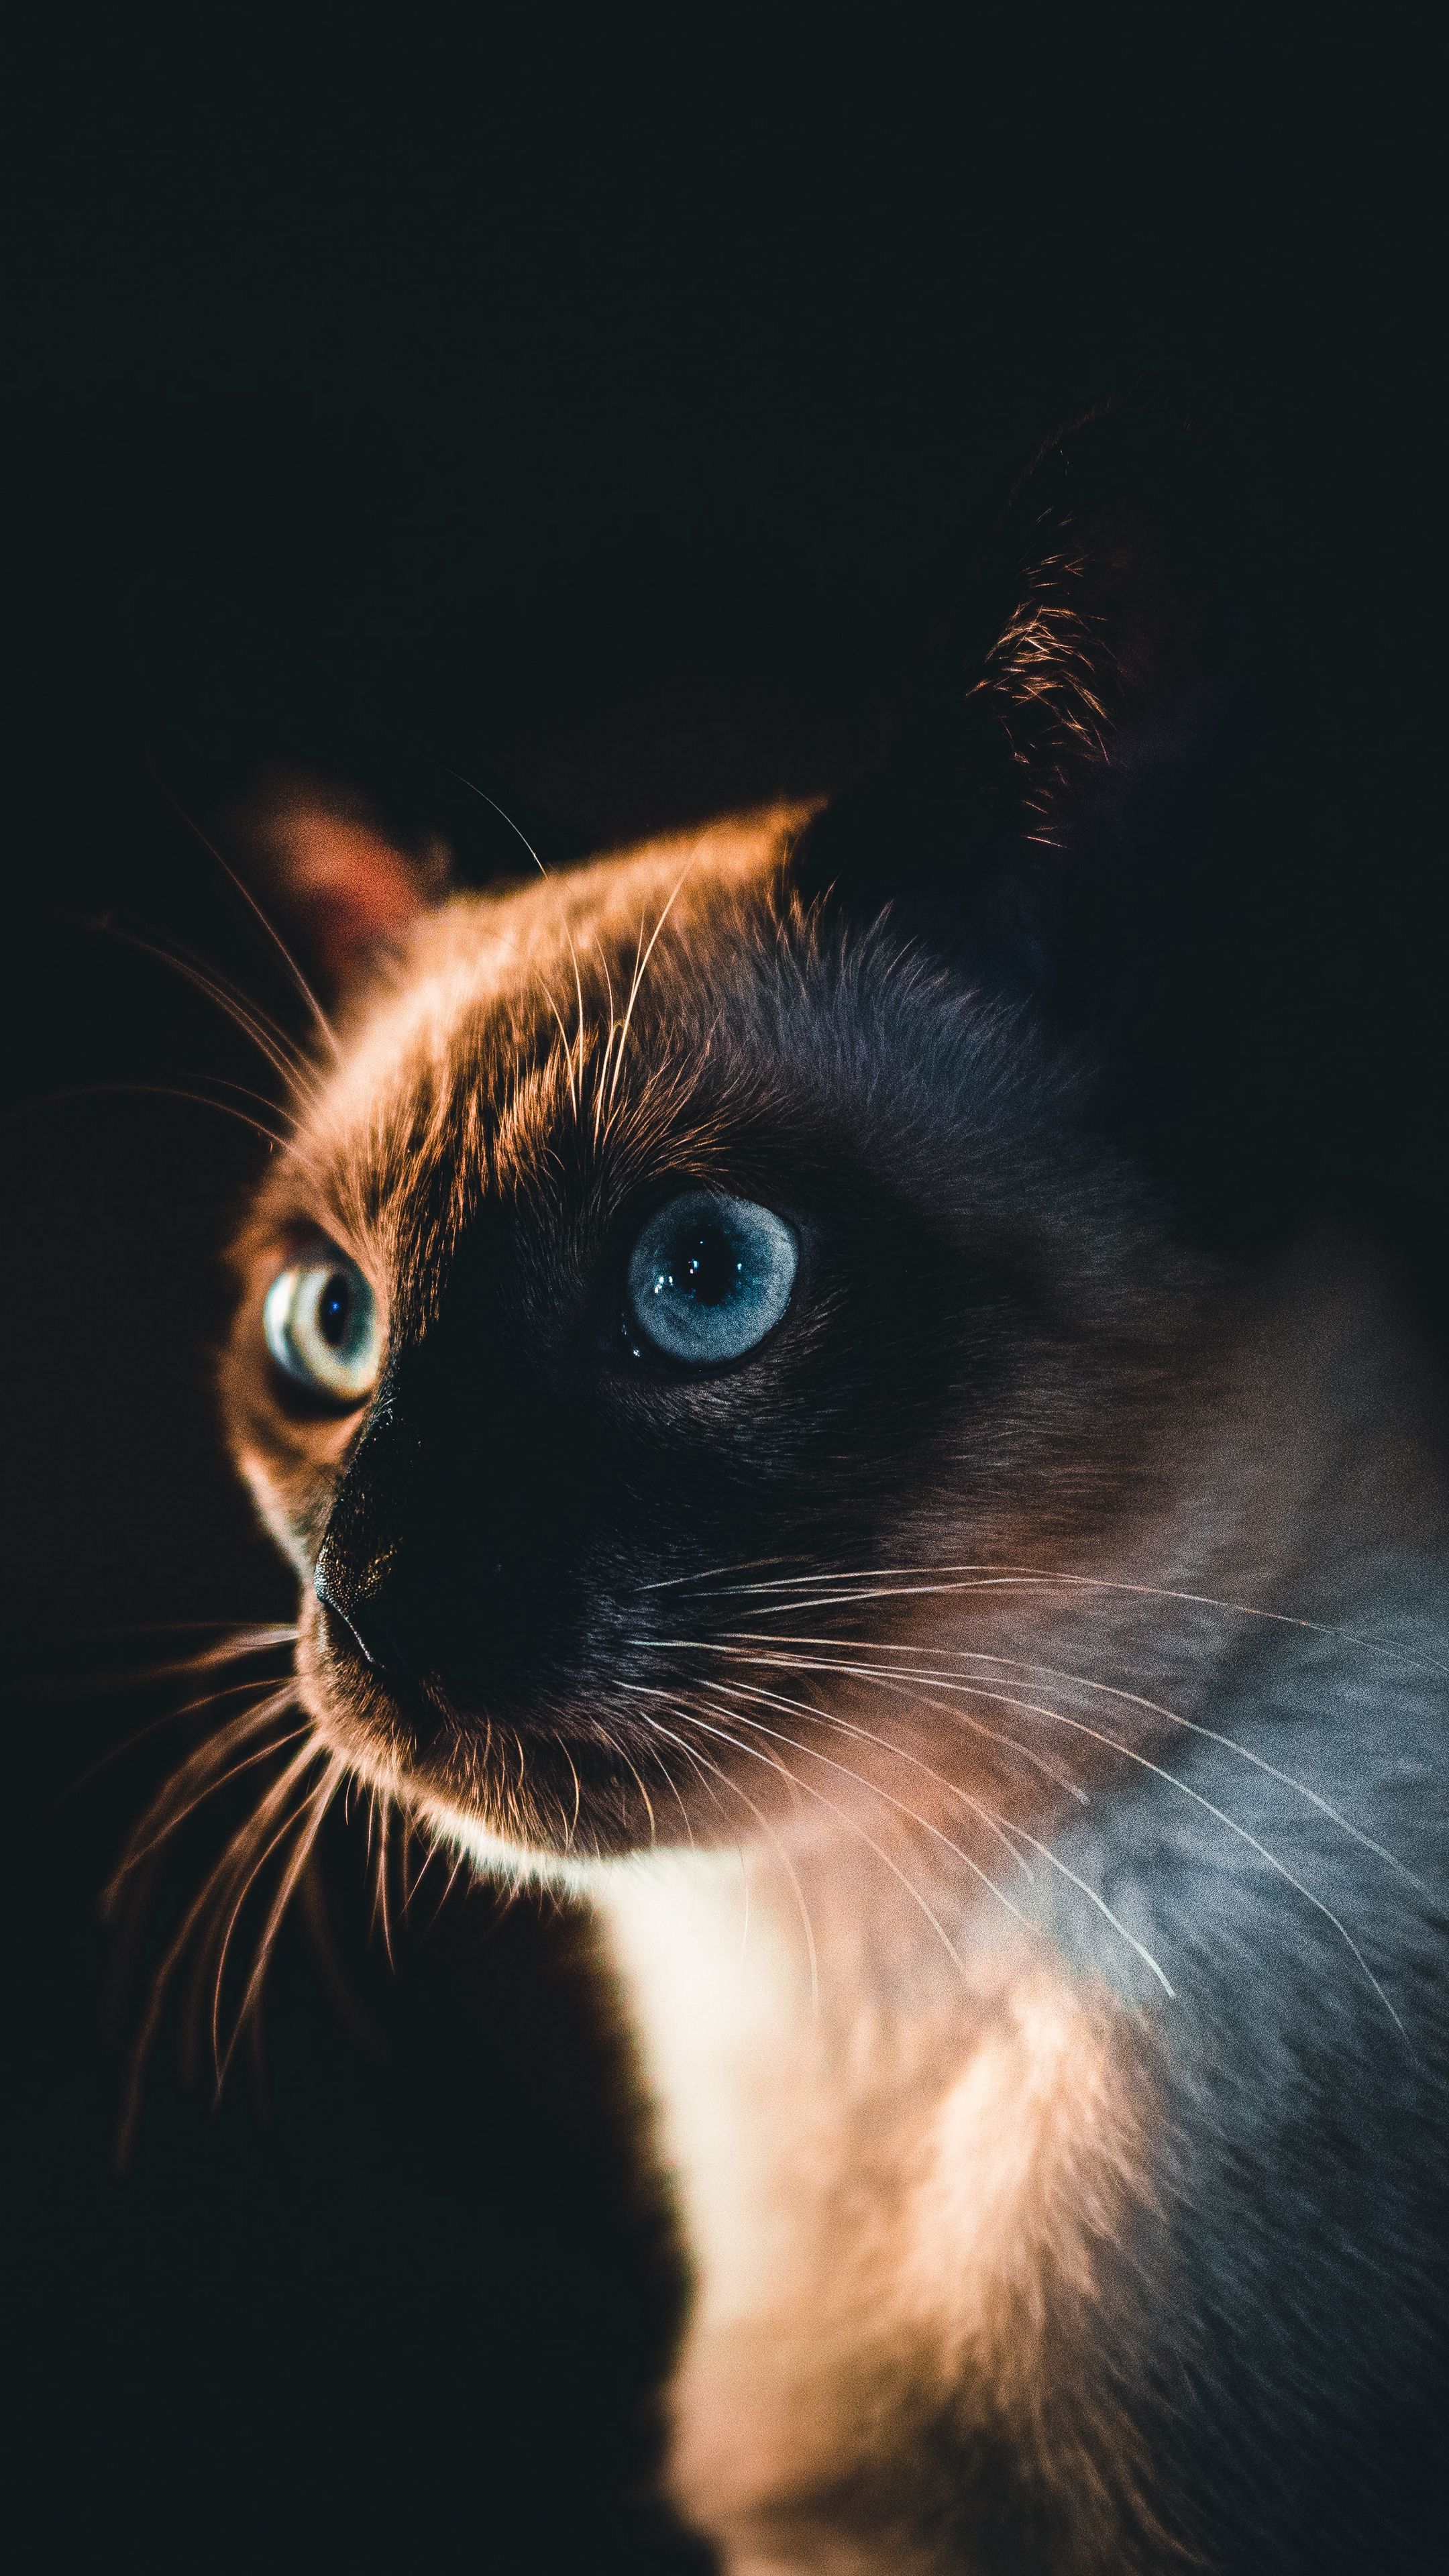 A cat with blue eyes looking into the camera - Cat